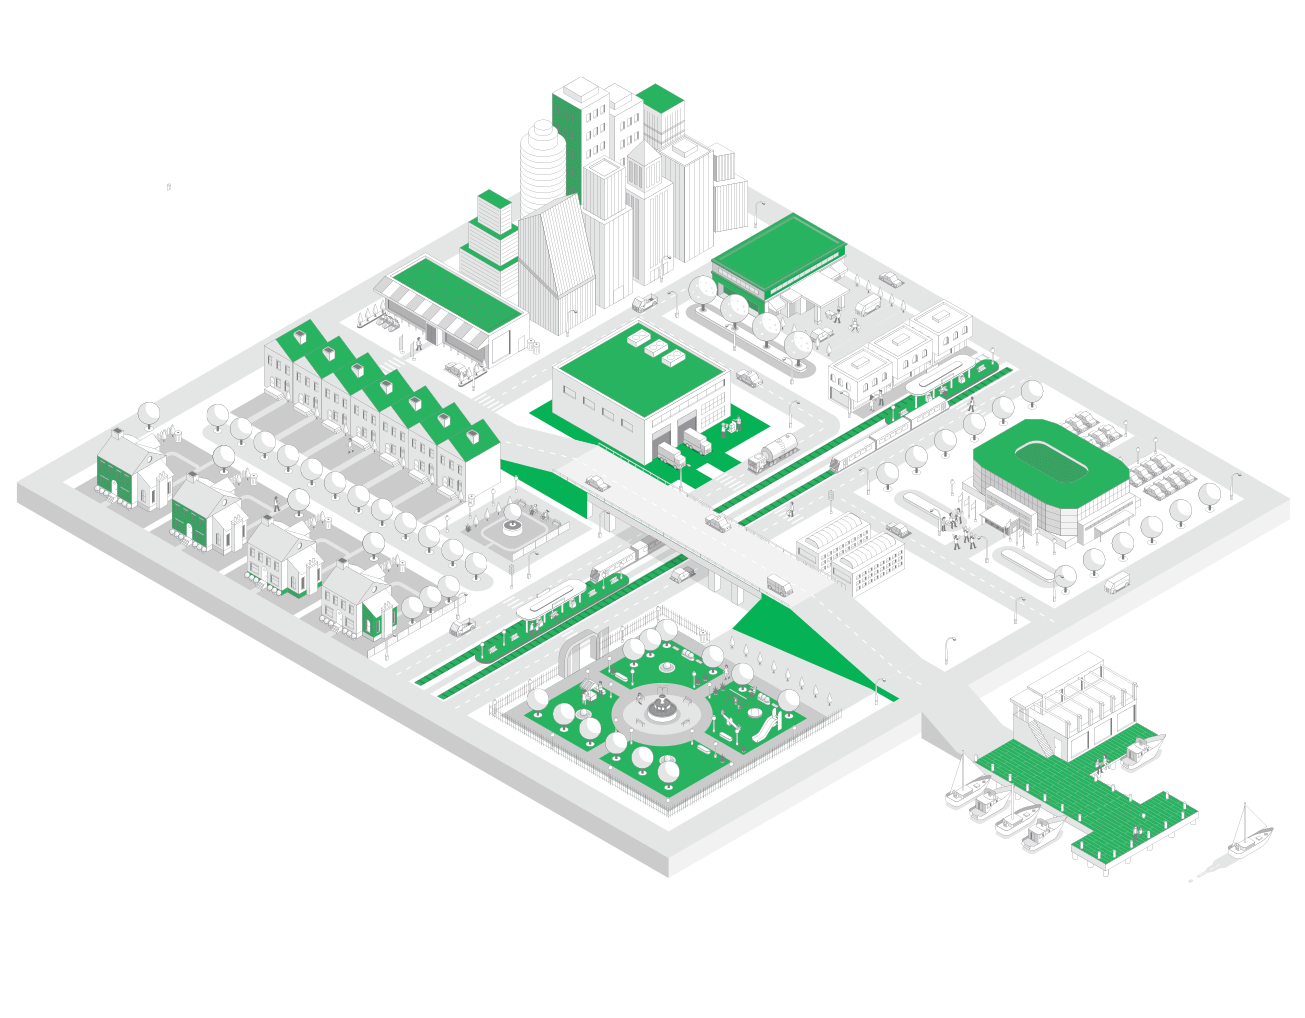 Our products in use shown in line drawing of city